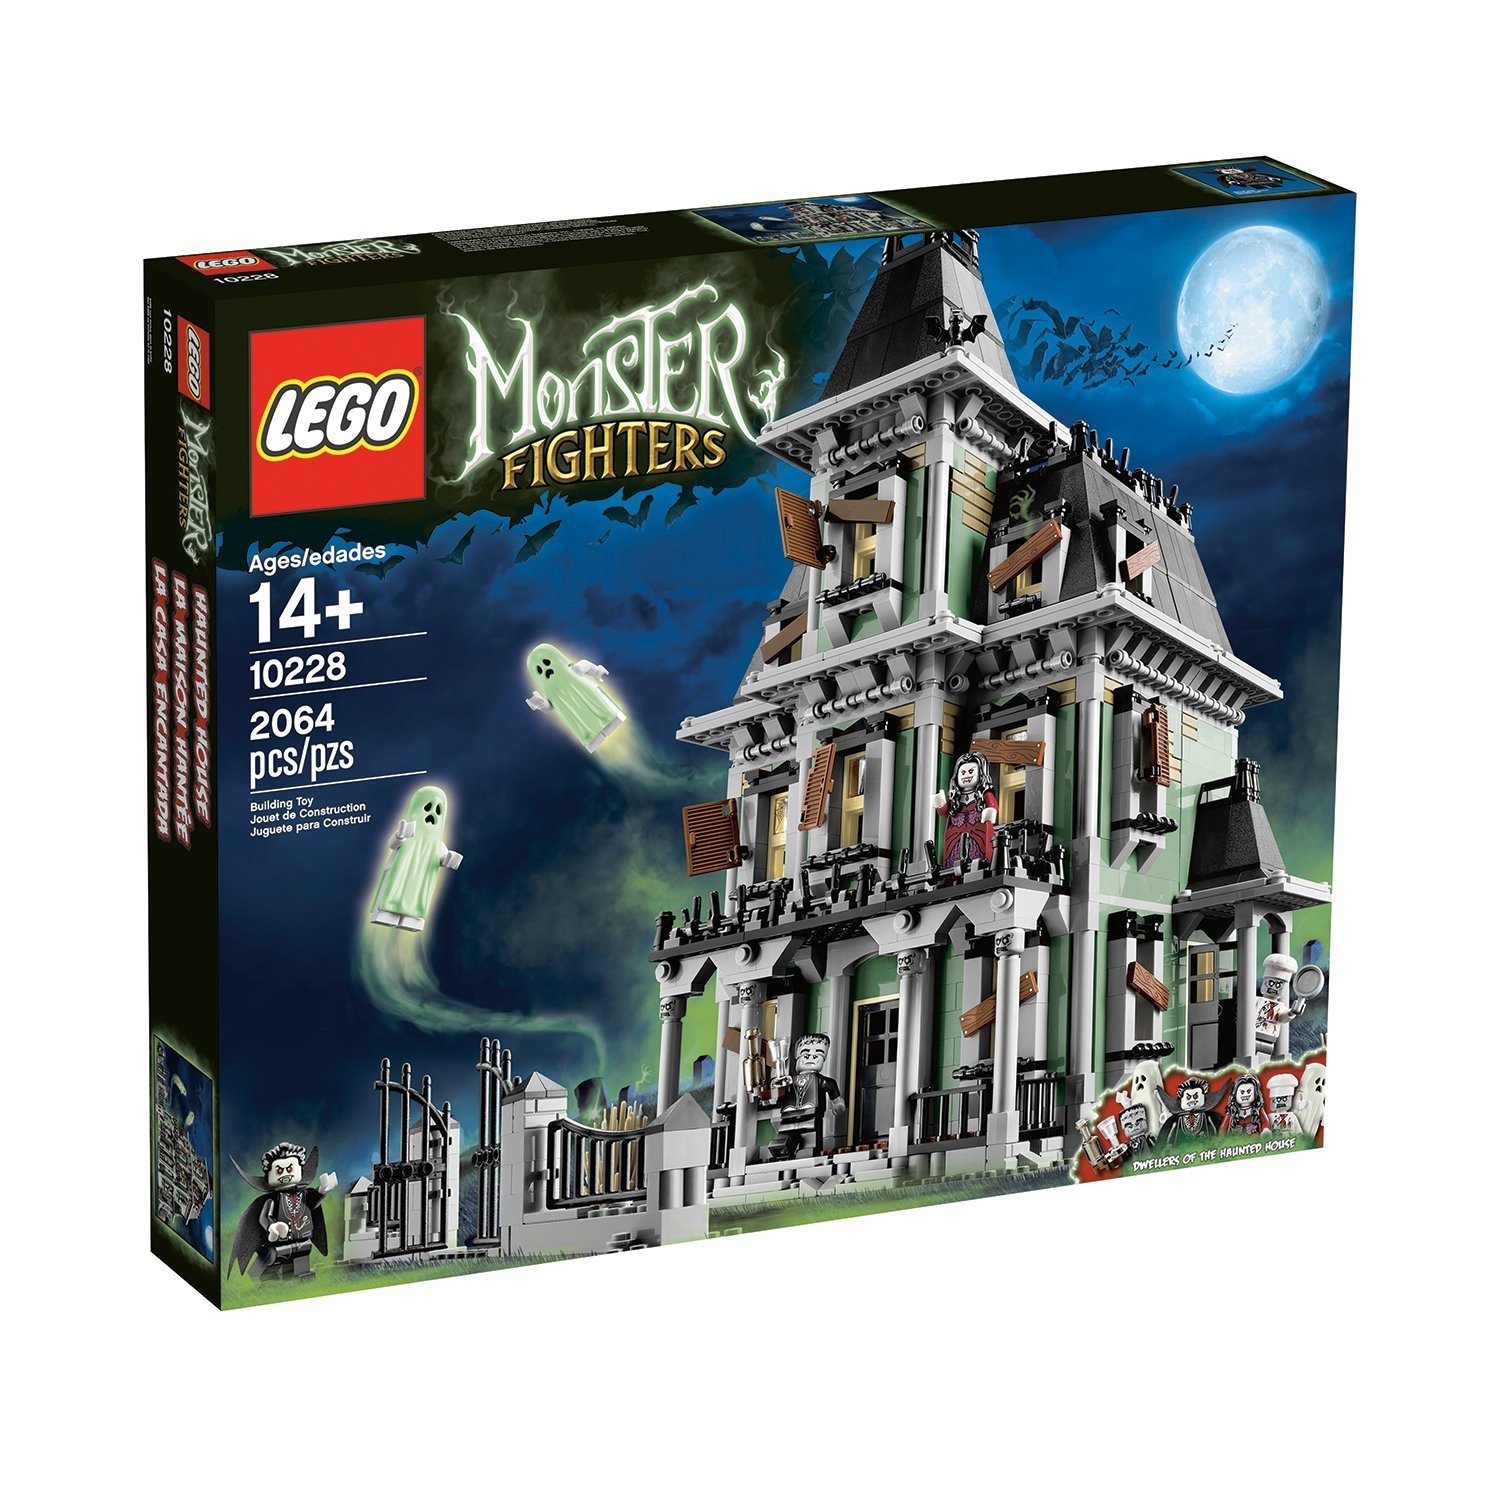 LEGO Monster Fighters Haunted House Halloween Minifigure - Frankenstein Butler with Tray (10228)